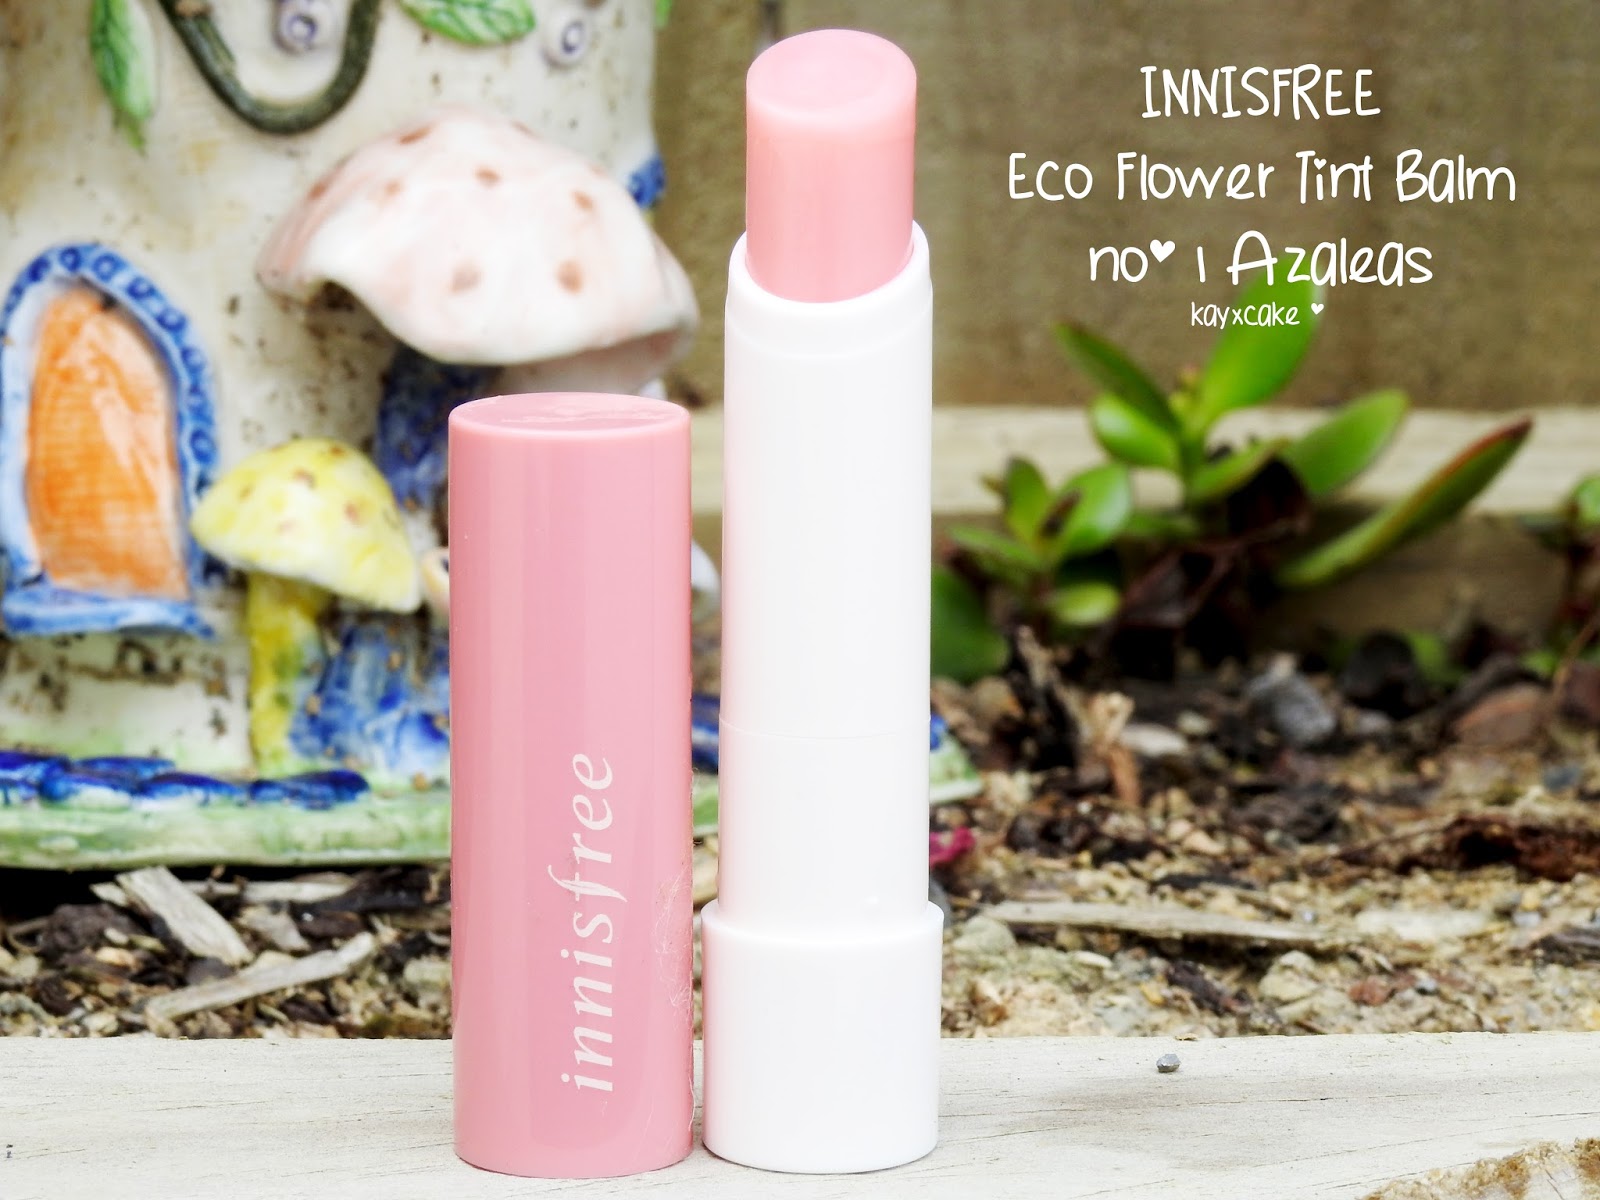 Innisfree Eco Flower Tint Balm ♡ All 5 Colors Swatches